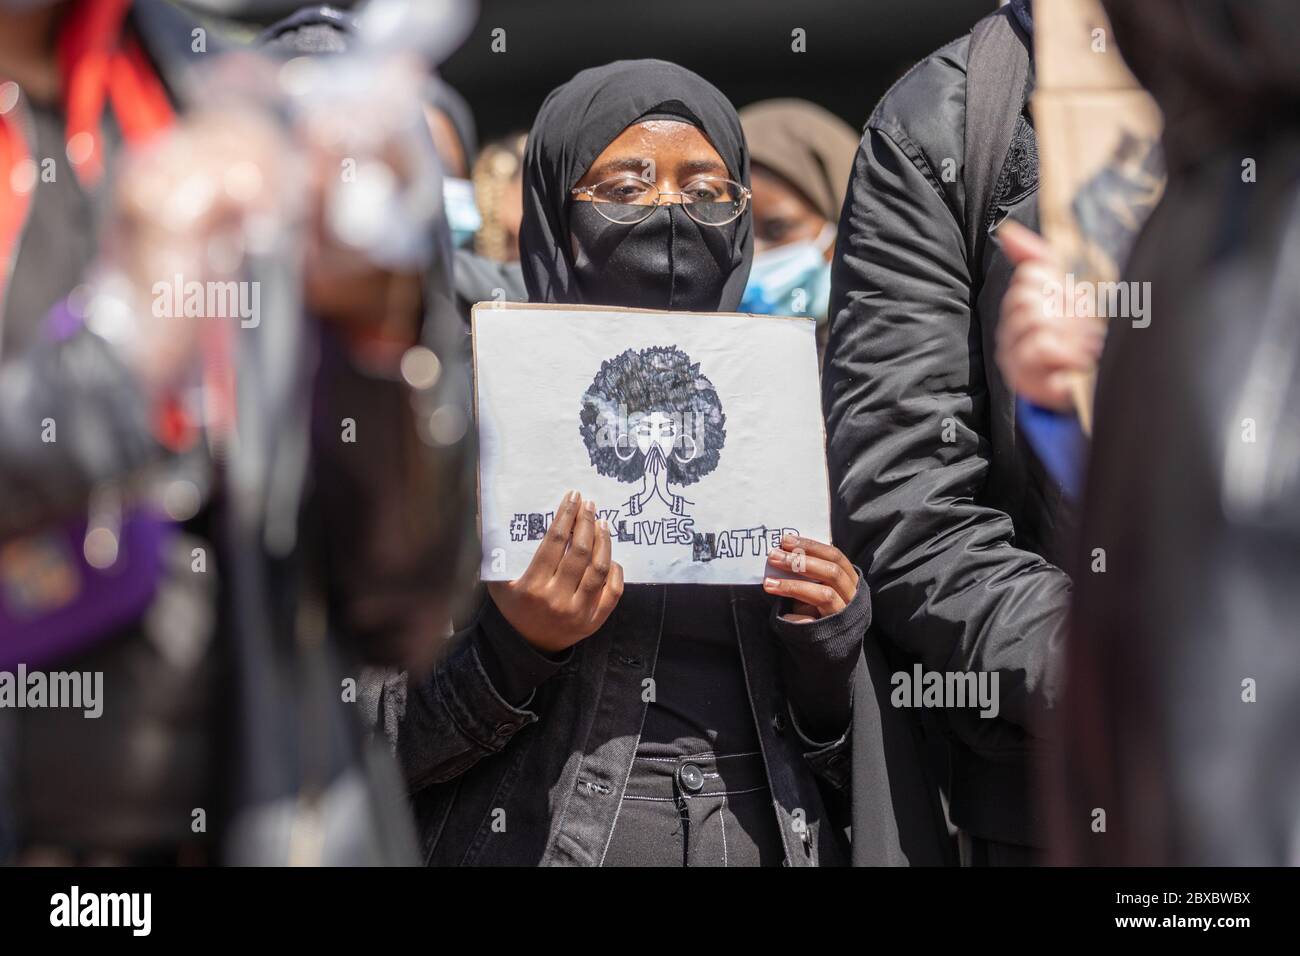 Black Lives Matter protest at the clock tower in Leicester city centre 6th June 2020. Stock Photo